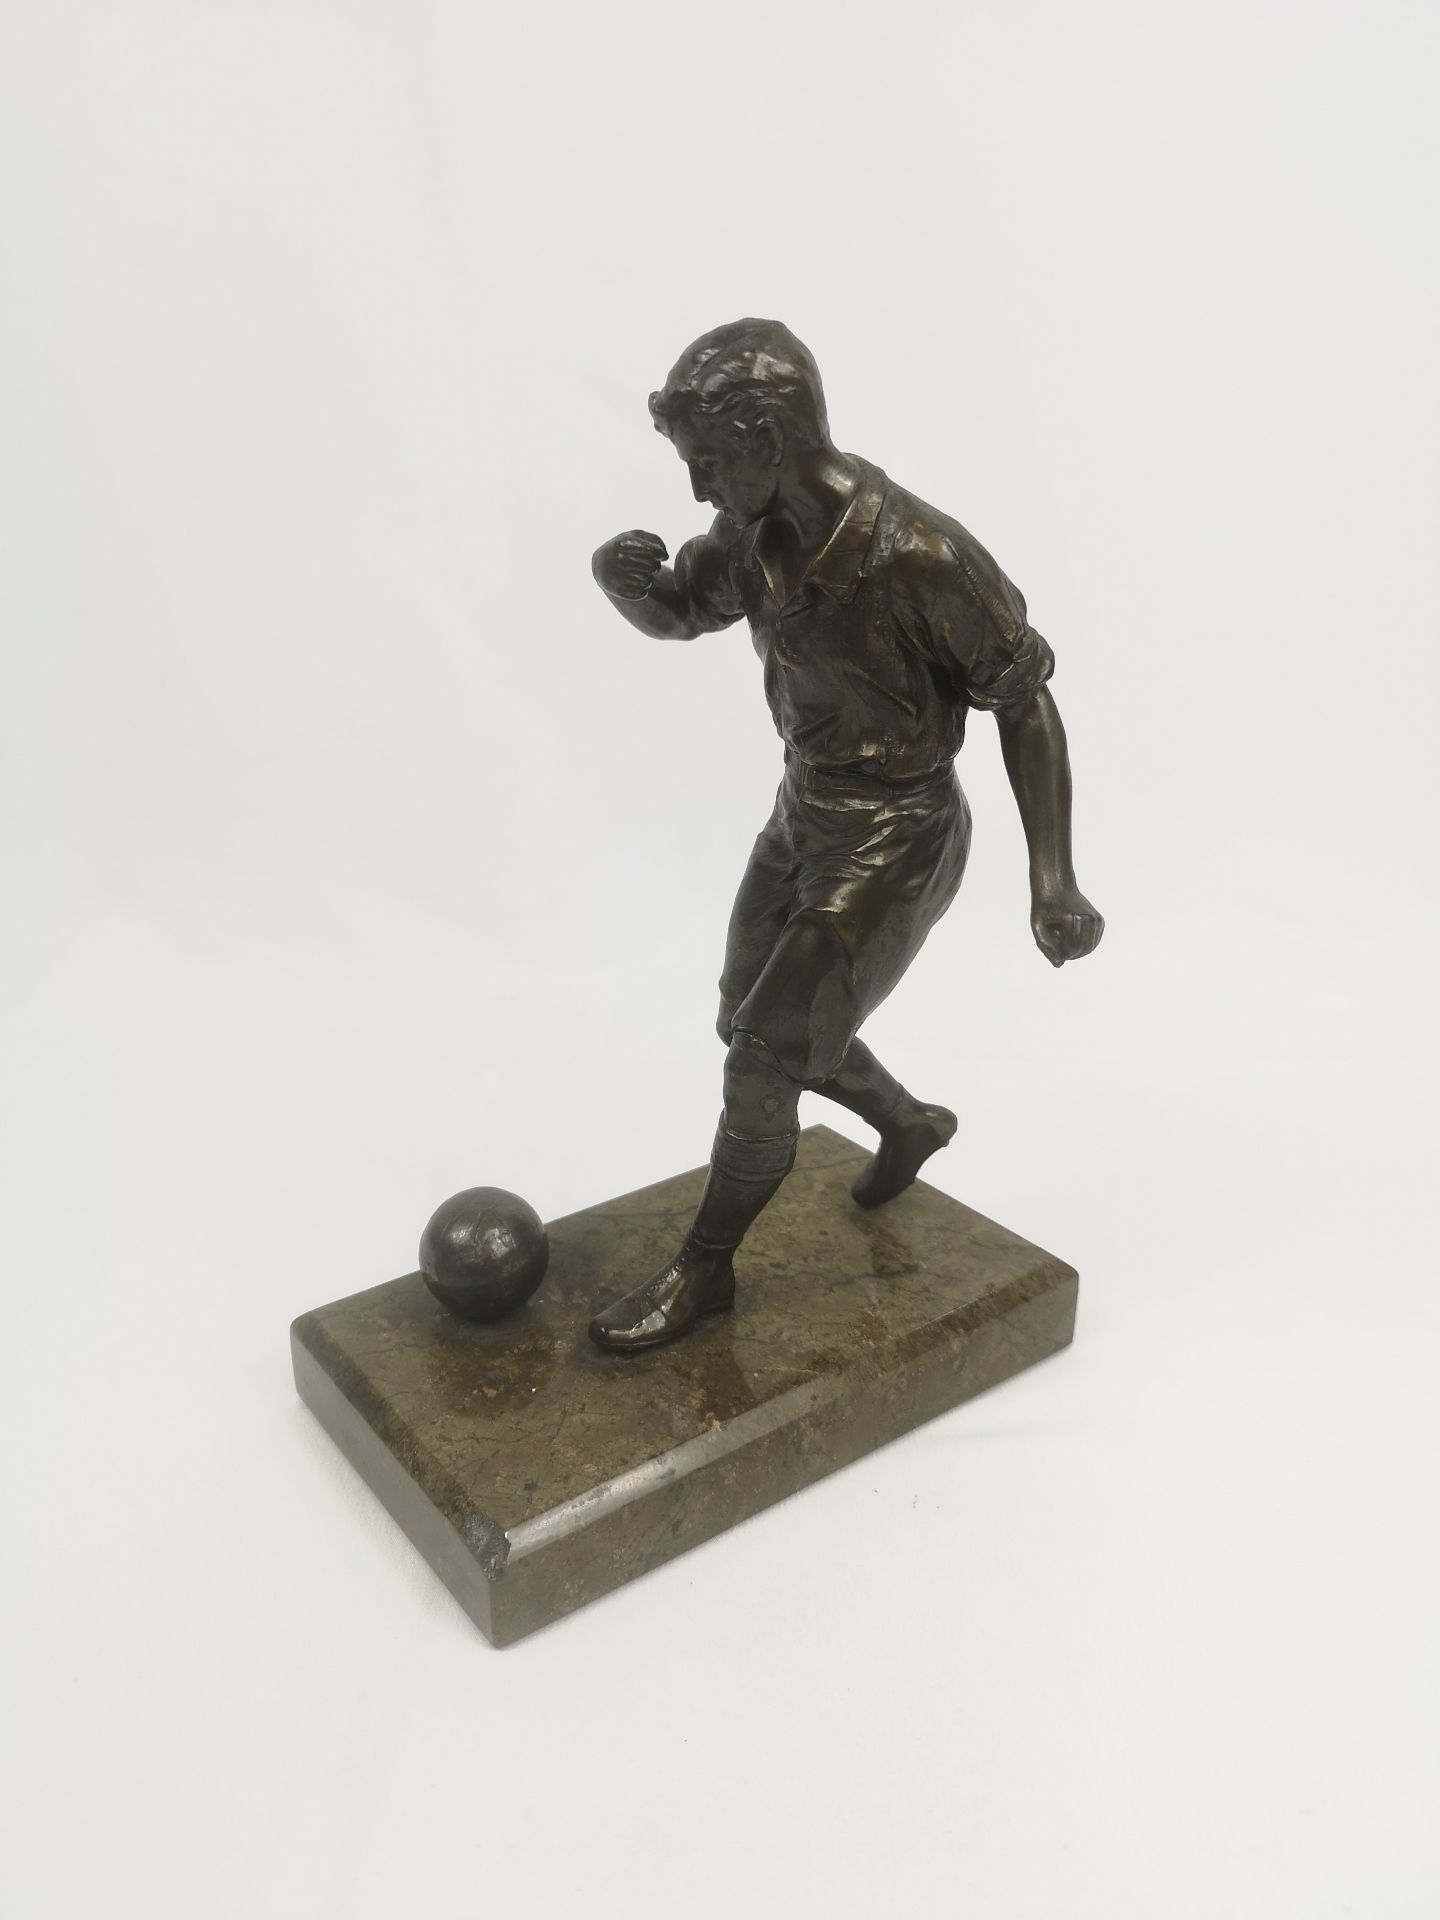 Bronzed figurine of a footballer - Image 2 of 5